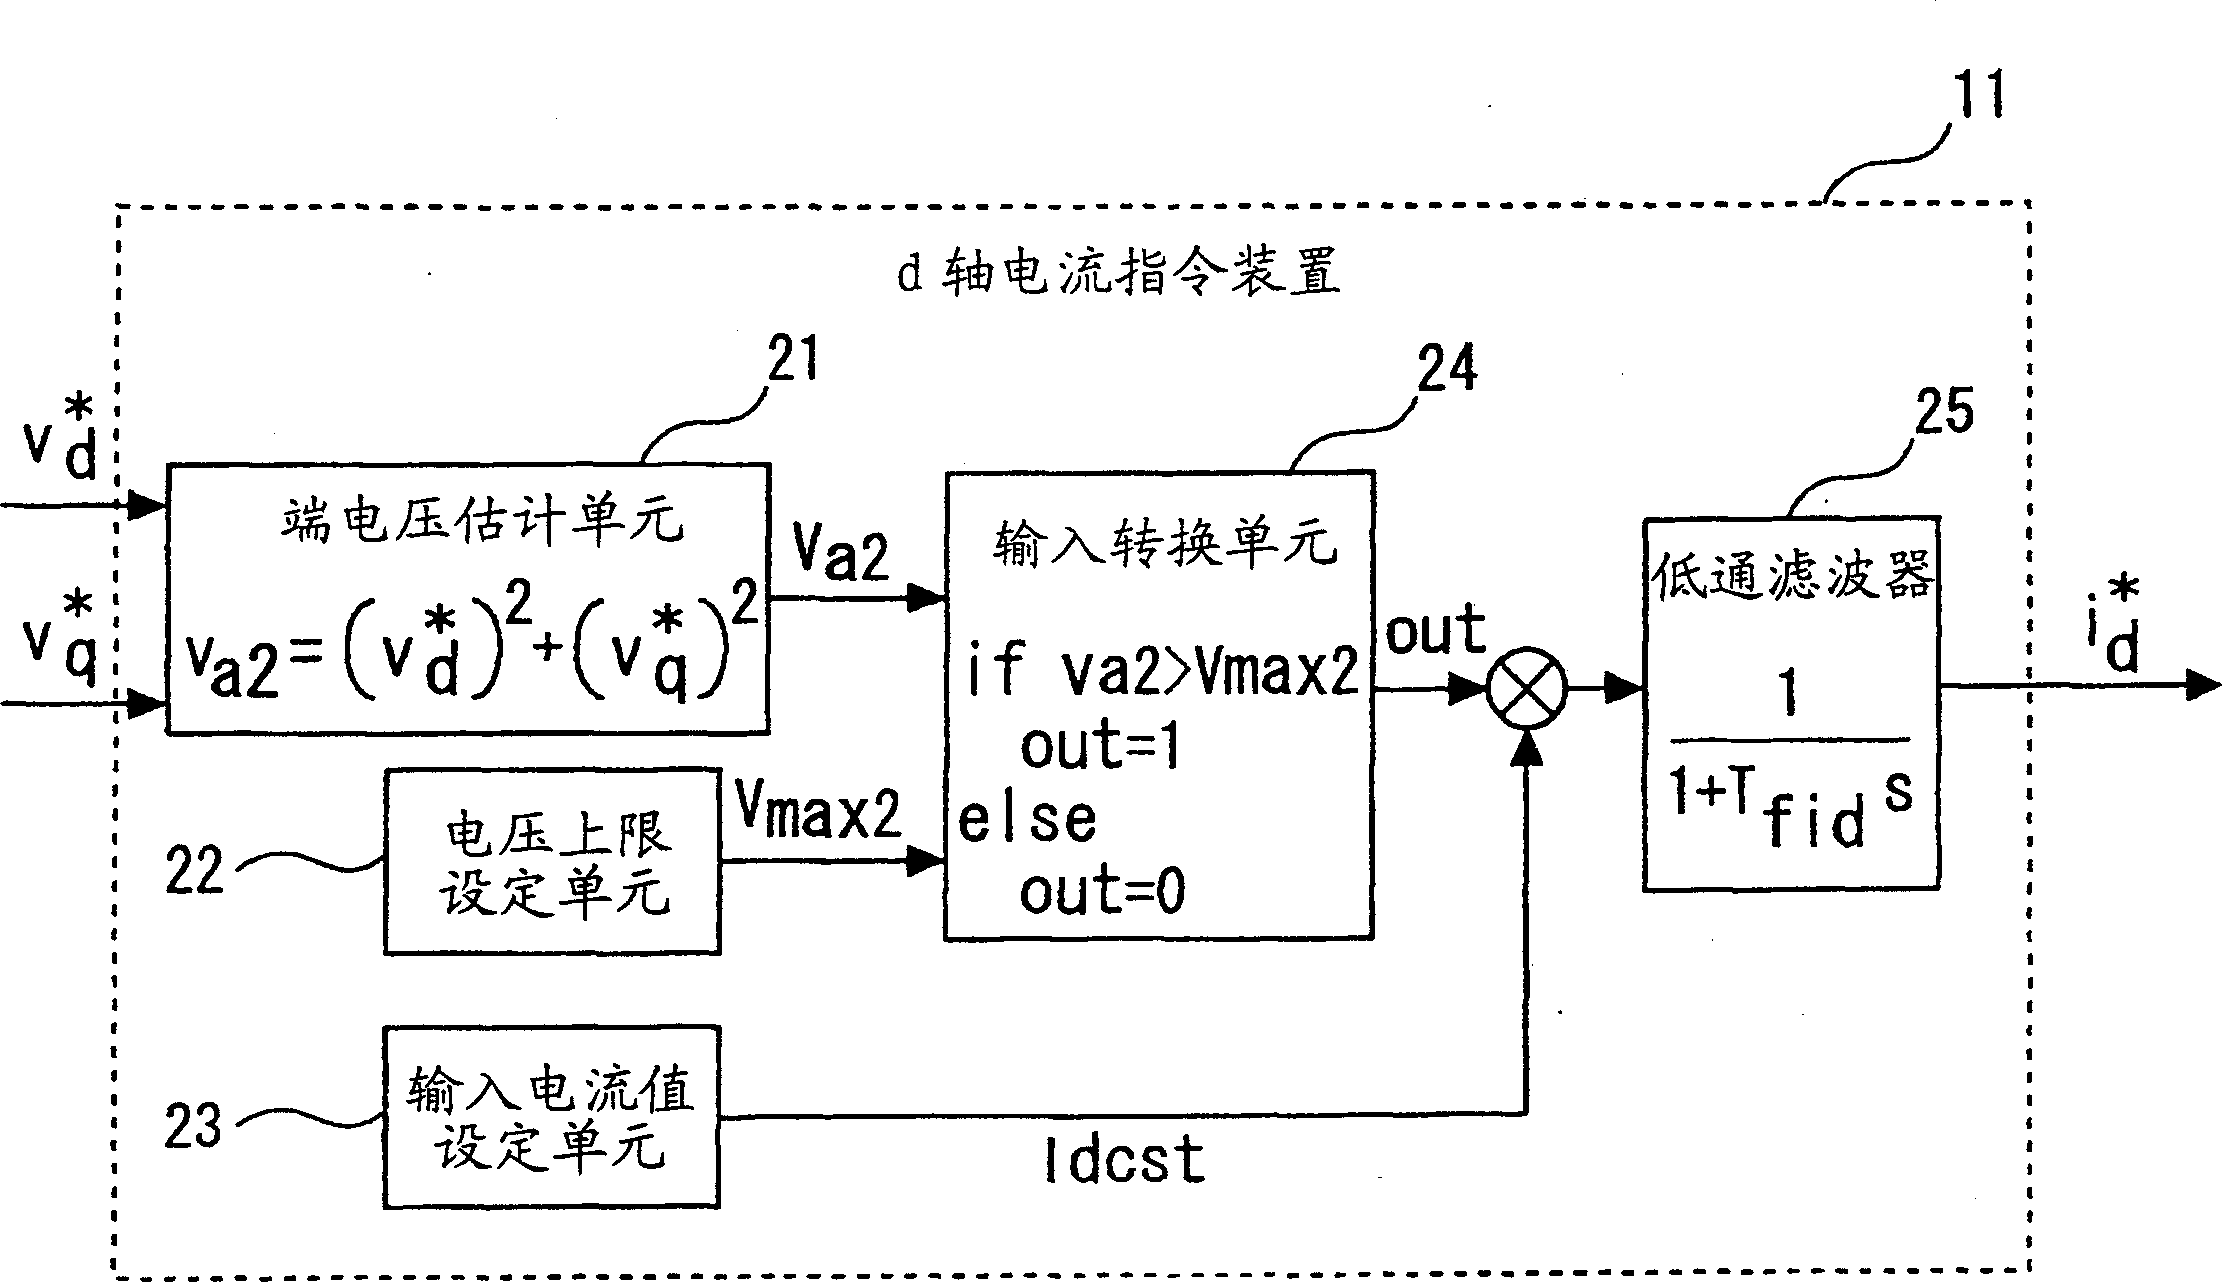 Controller of permanent magnet synchronous motor